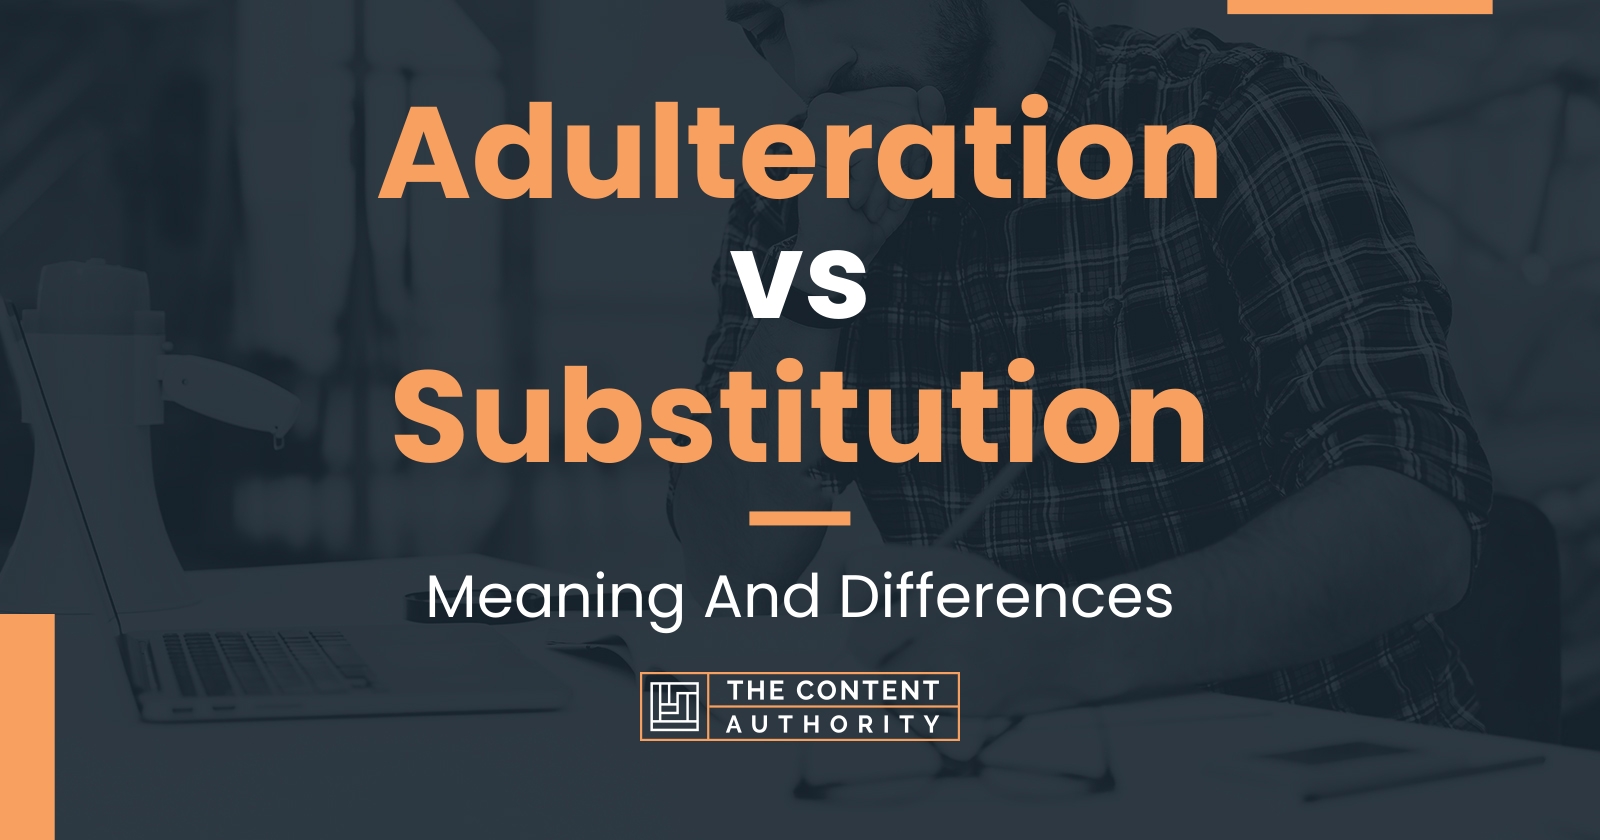 Adulteration vs Substitution: Meaning And Differences